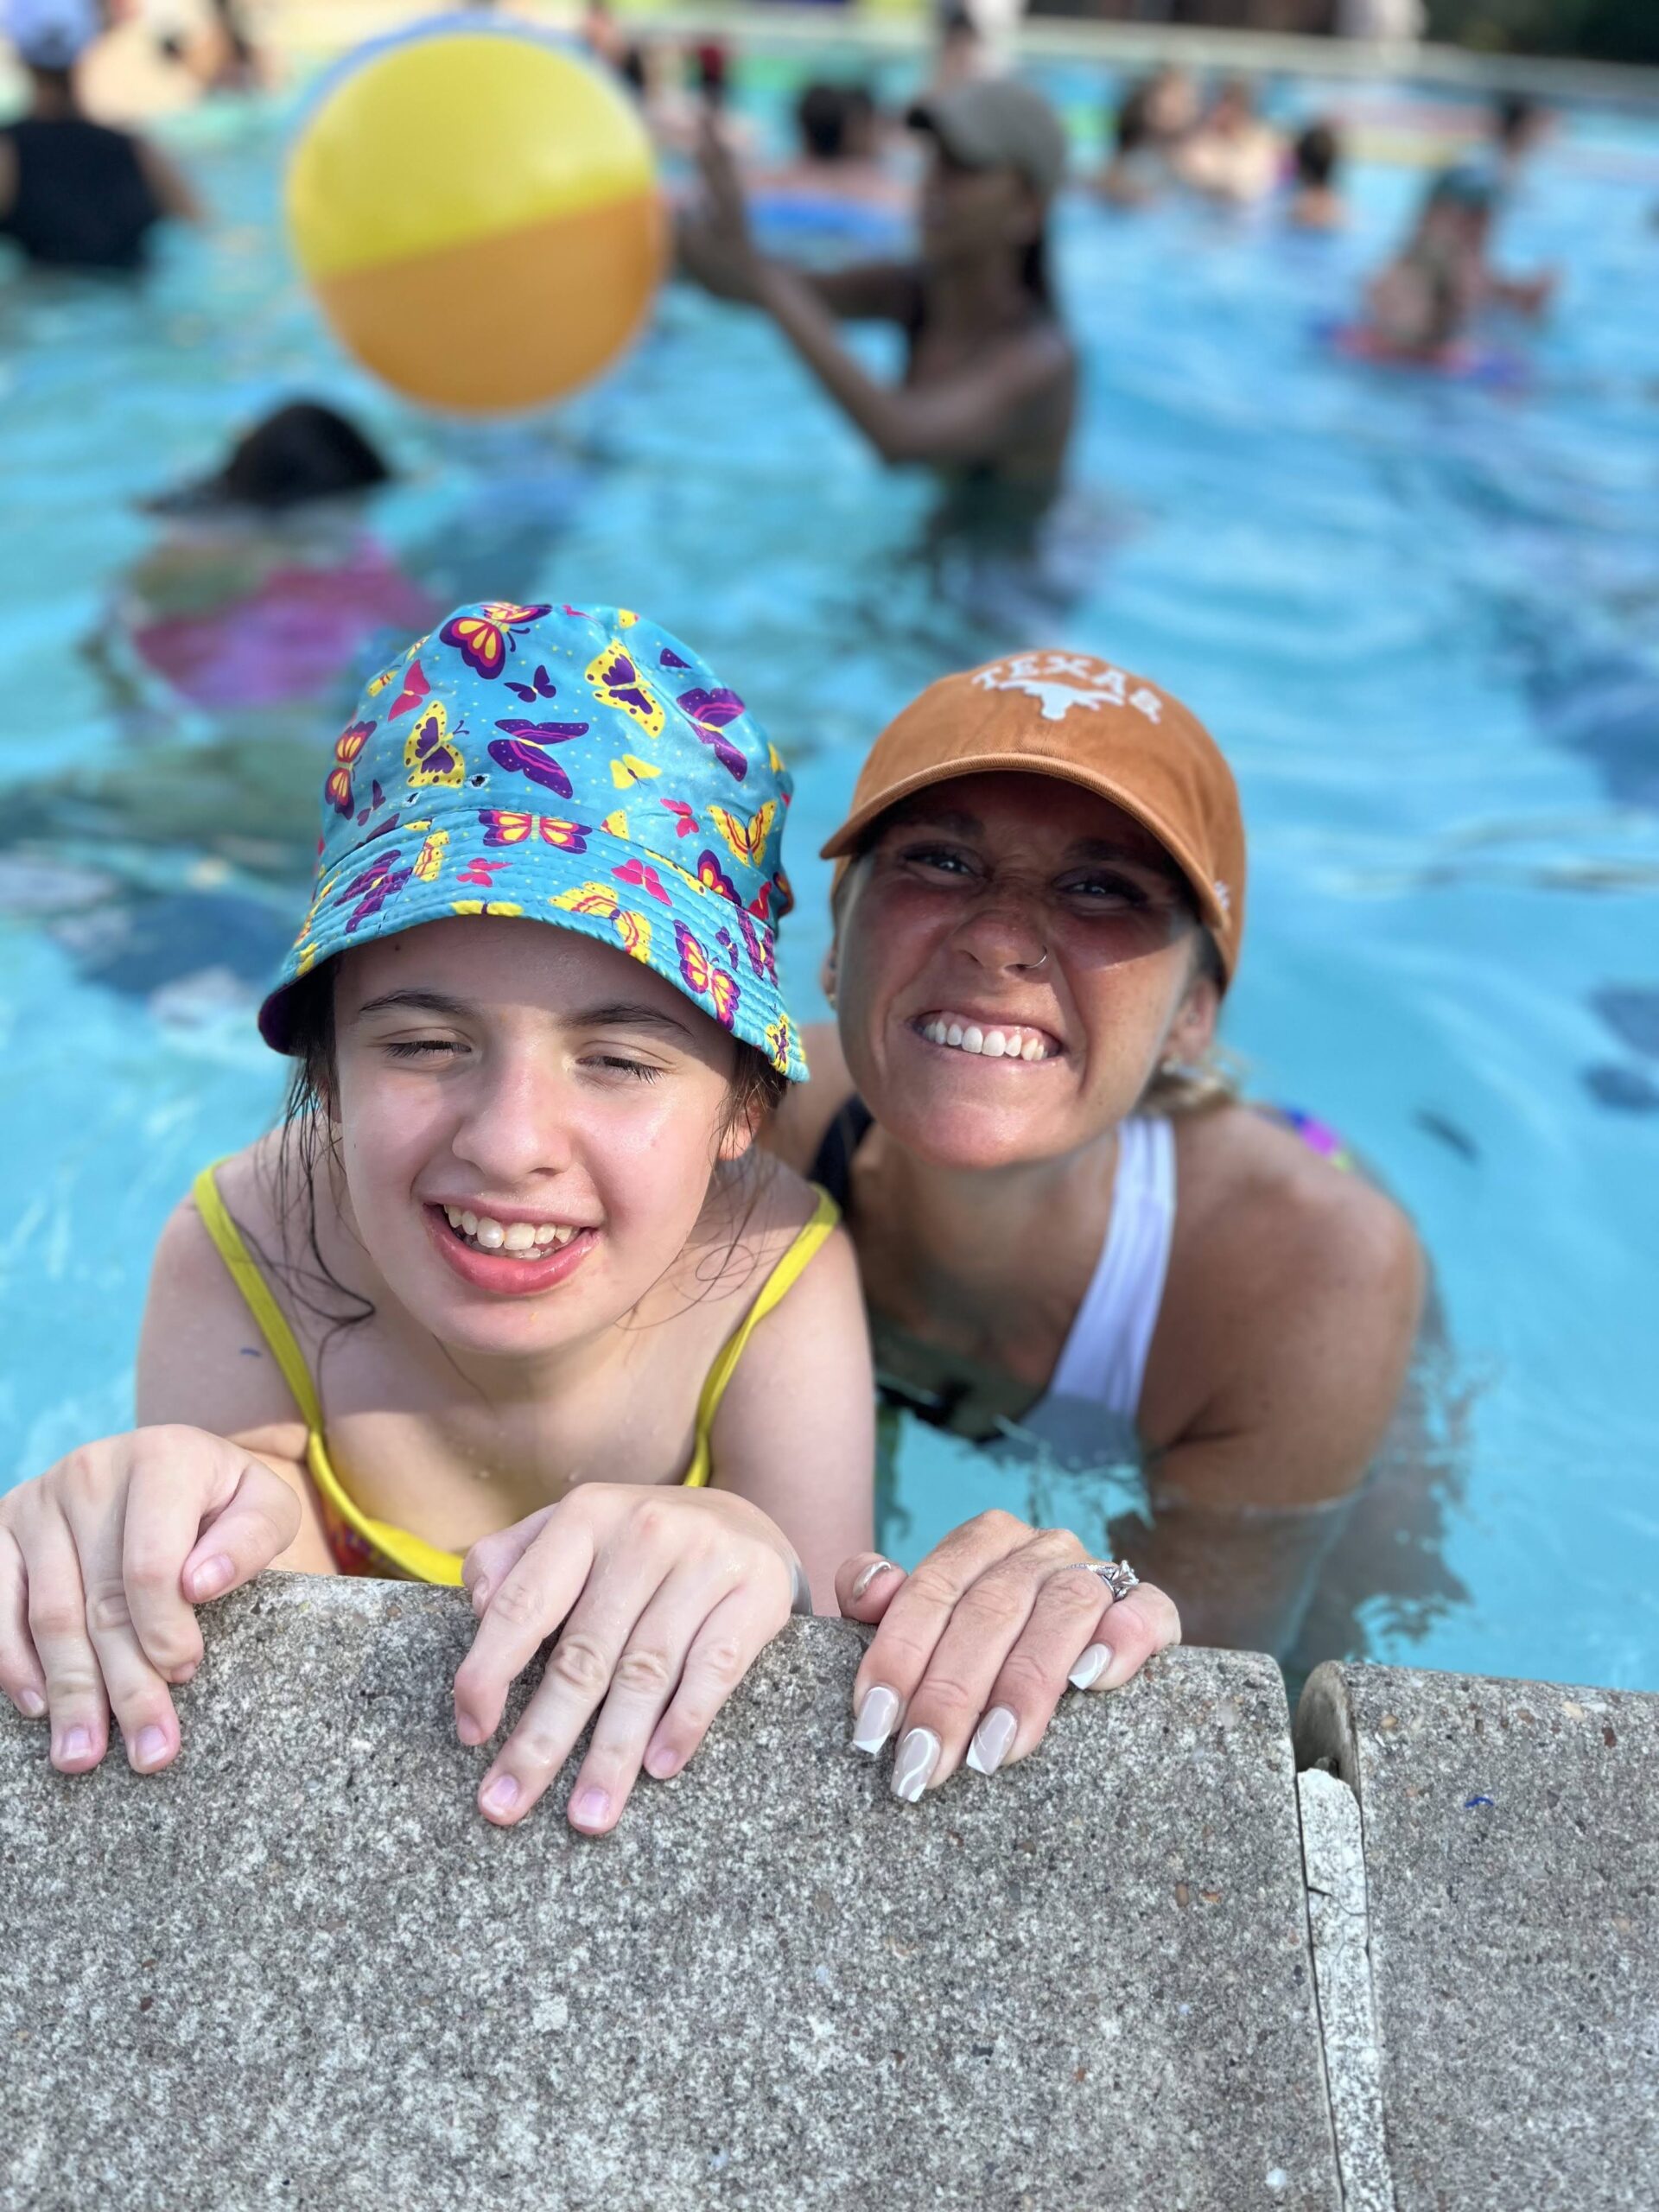 Girl camper in a yellow bathing suit and blue butterfly patterned hat smiling for a picture with a staff member, who is wearing a white tank top and orange baseball cap. 